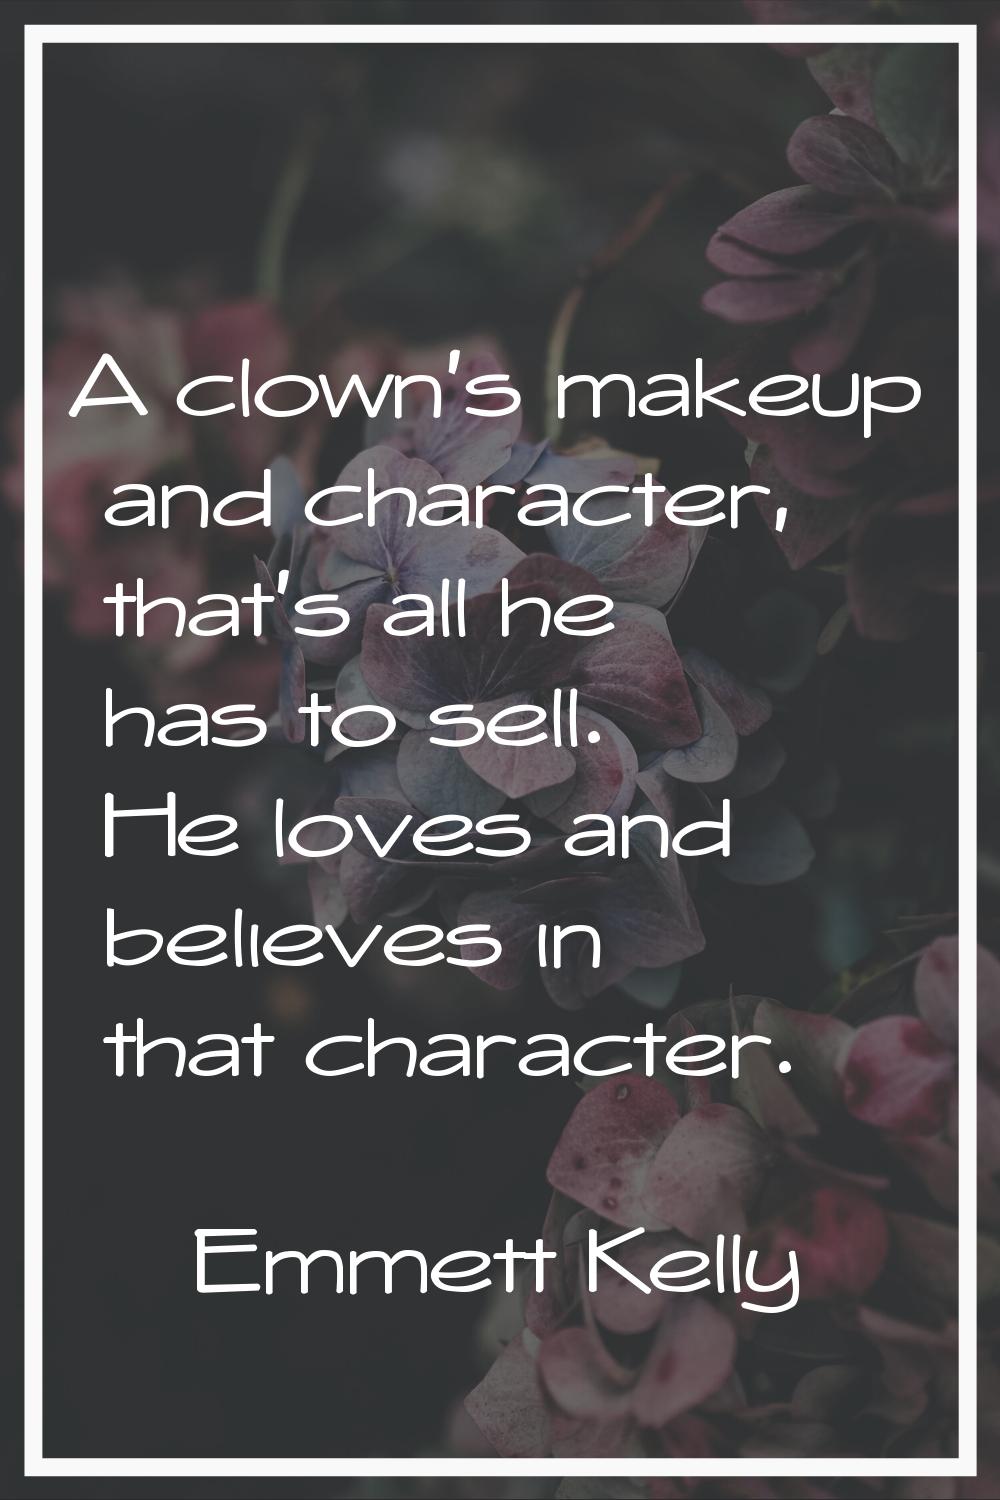 A clown's makeup and character, that's all he has to sell. He loves and believes in that character.